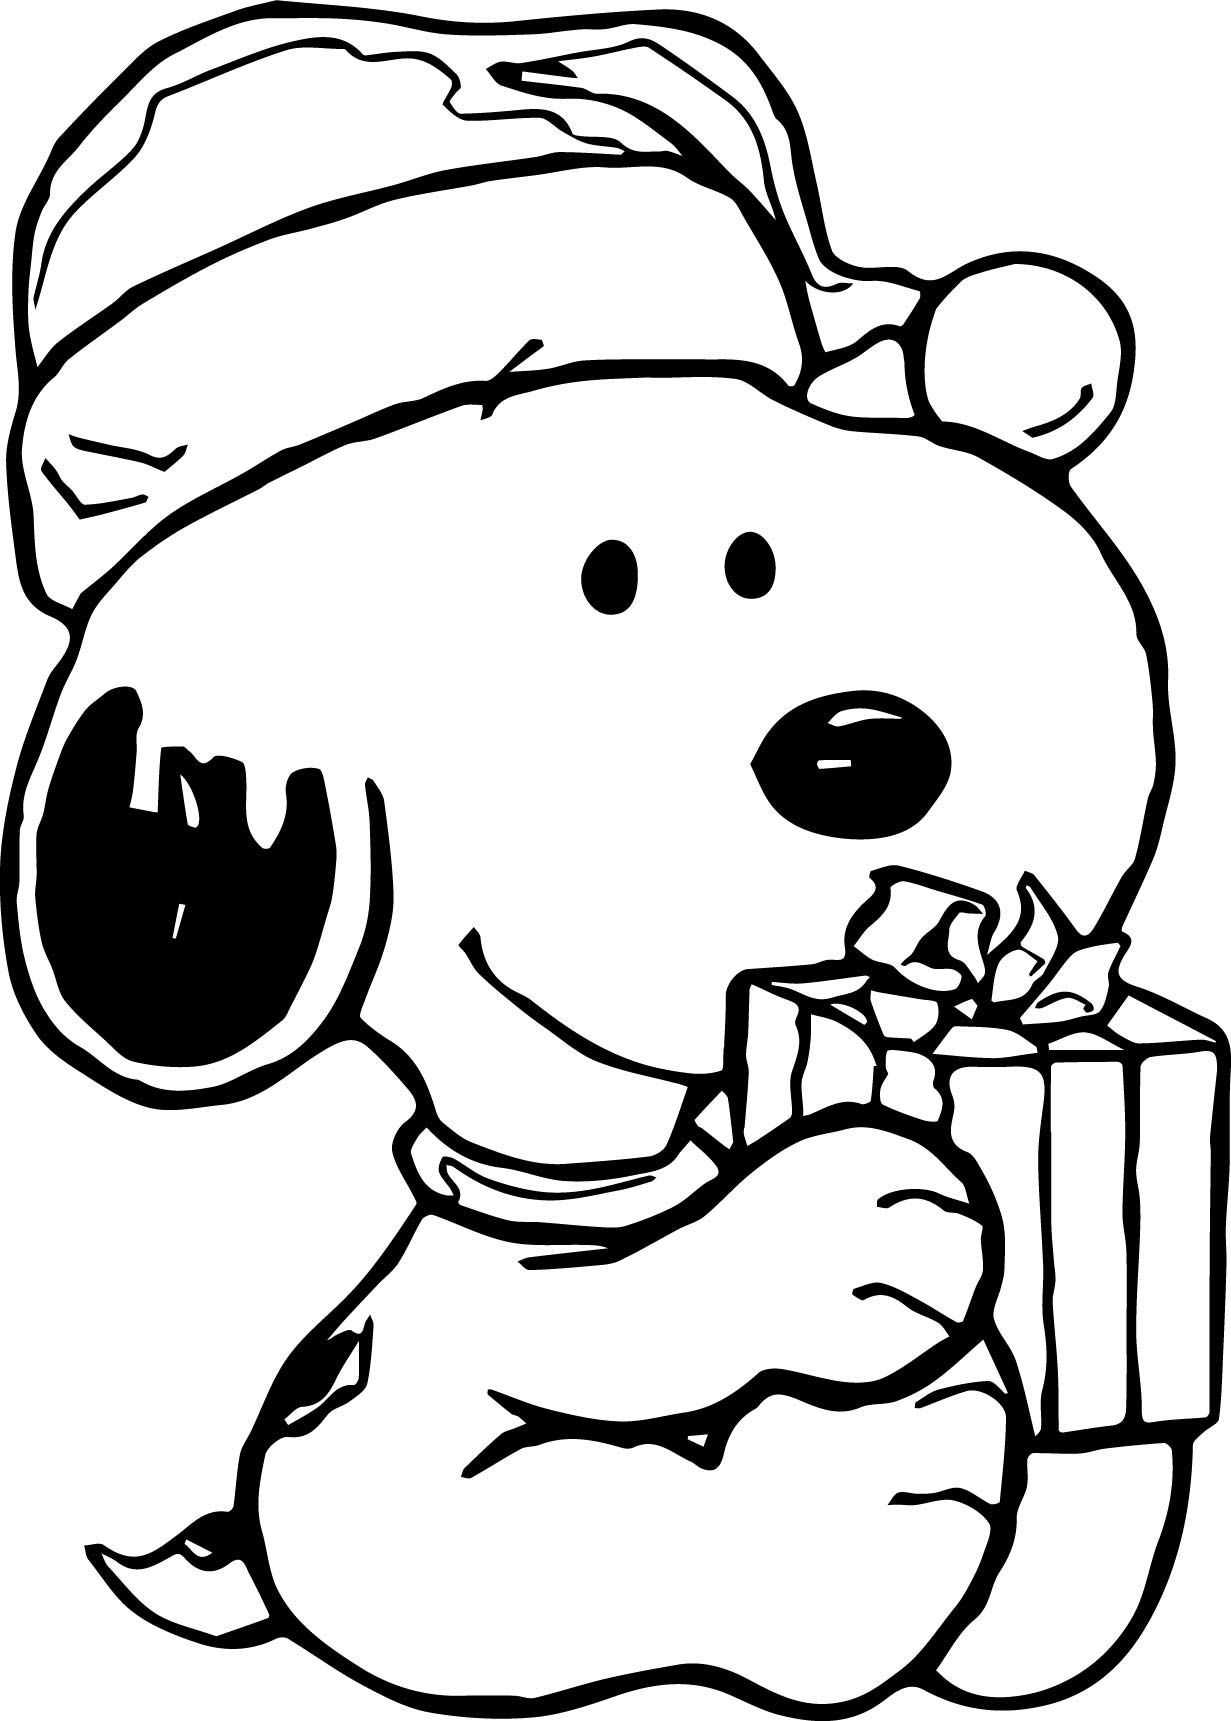 Free Printable Charlie Brown Christmas Coloring Pages For